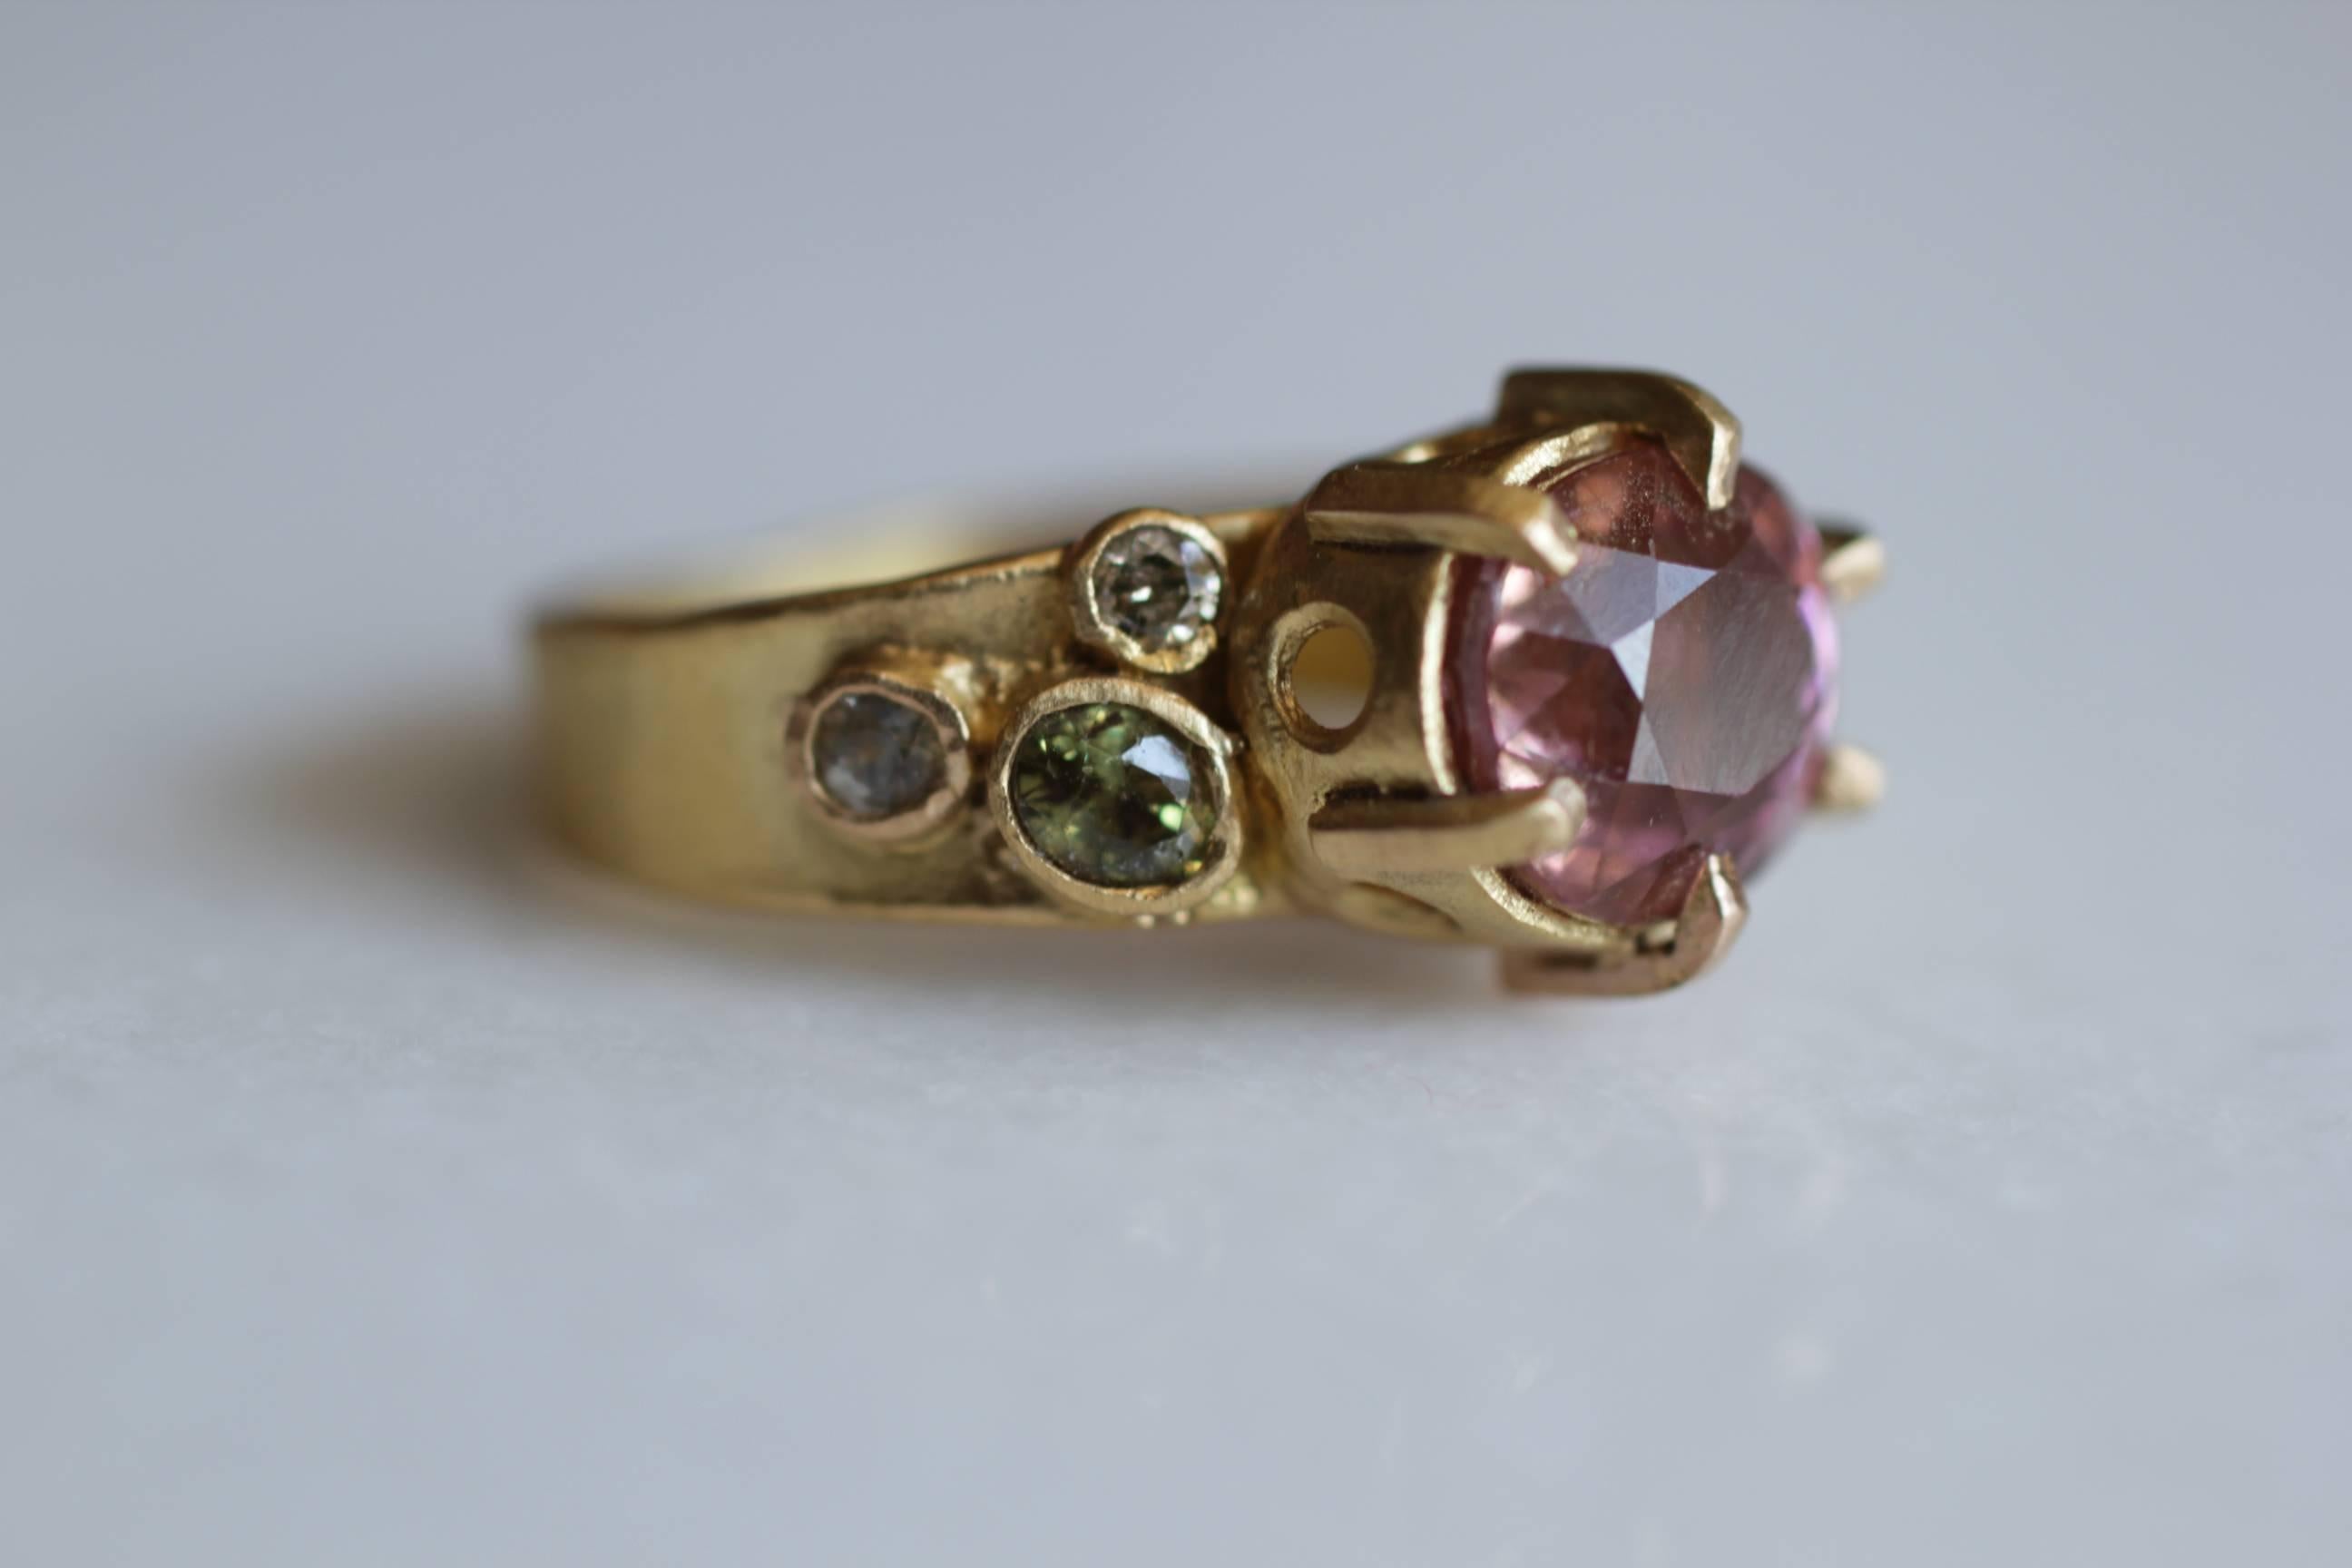 Rhododendron Ring. This one of a kind handmade 21k solid yellow gold ring features a beautiful 4.6 Ct peach tourmaline surrounded by colored stones, conjuring a vision of a flower nestled in its foliage. Can be worn alone of for a more dramatic